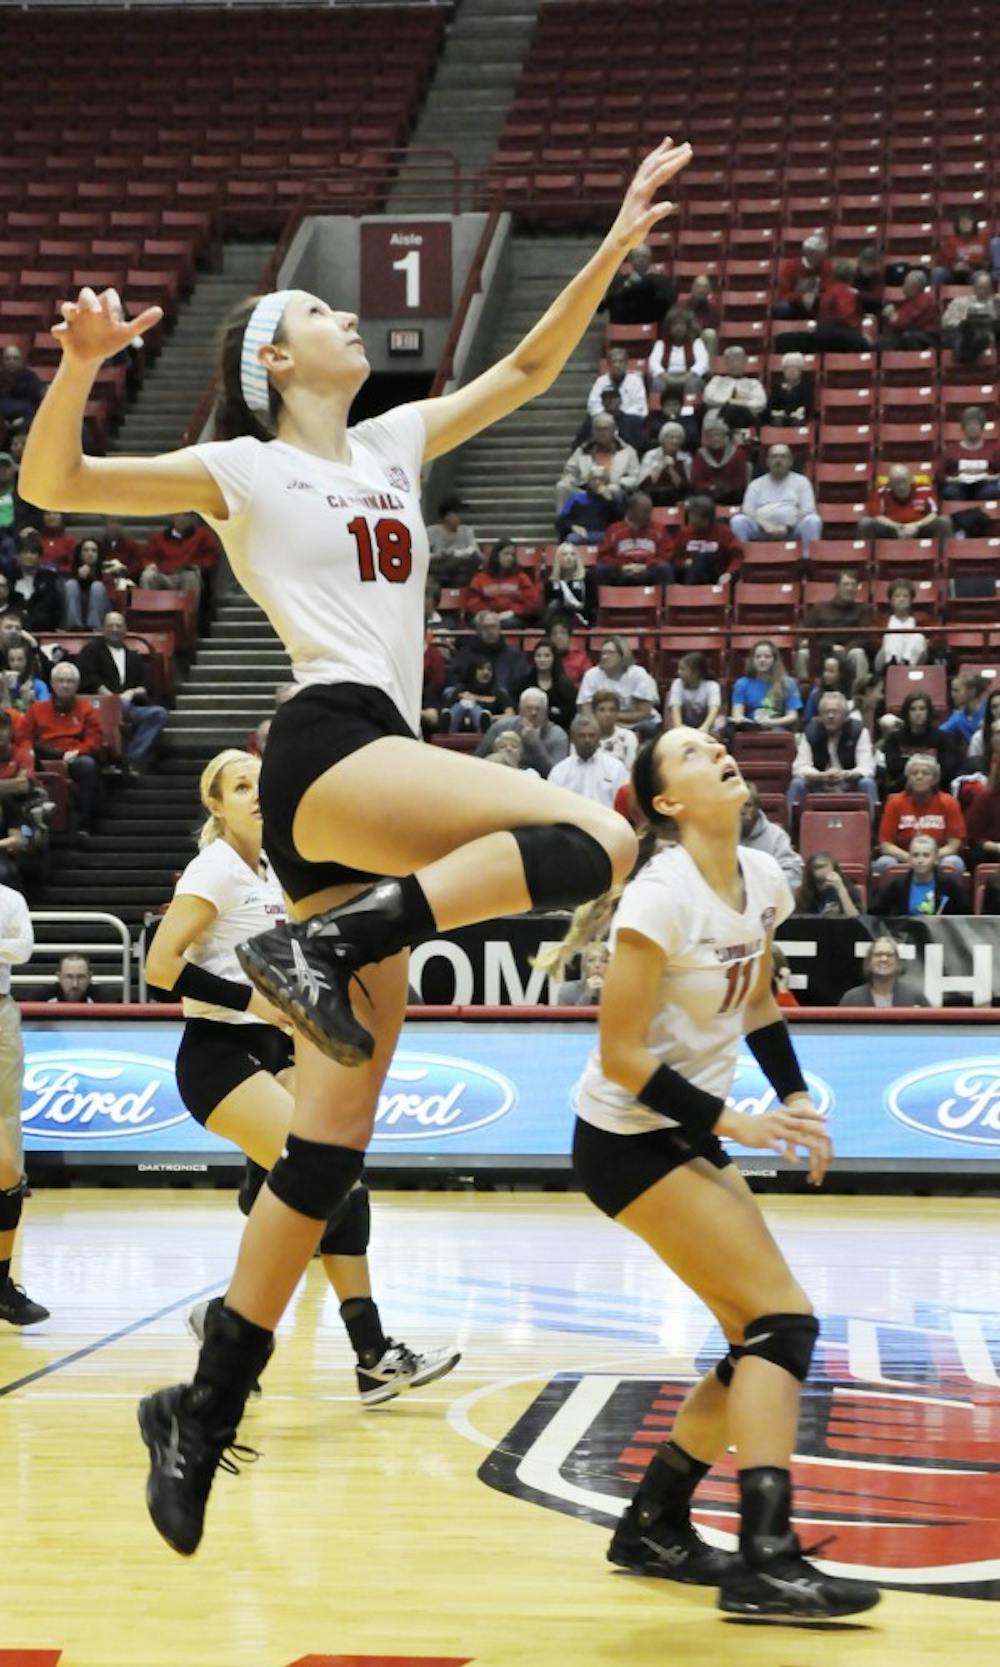 Junior opposite hitter Hayley Benson jumps to hit the ball against Central Michigan University on Nov. 1 in Worthen Arena. DN PHOTO SICONG XING